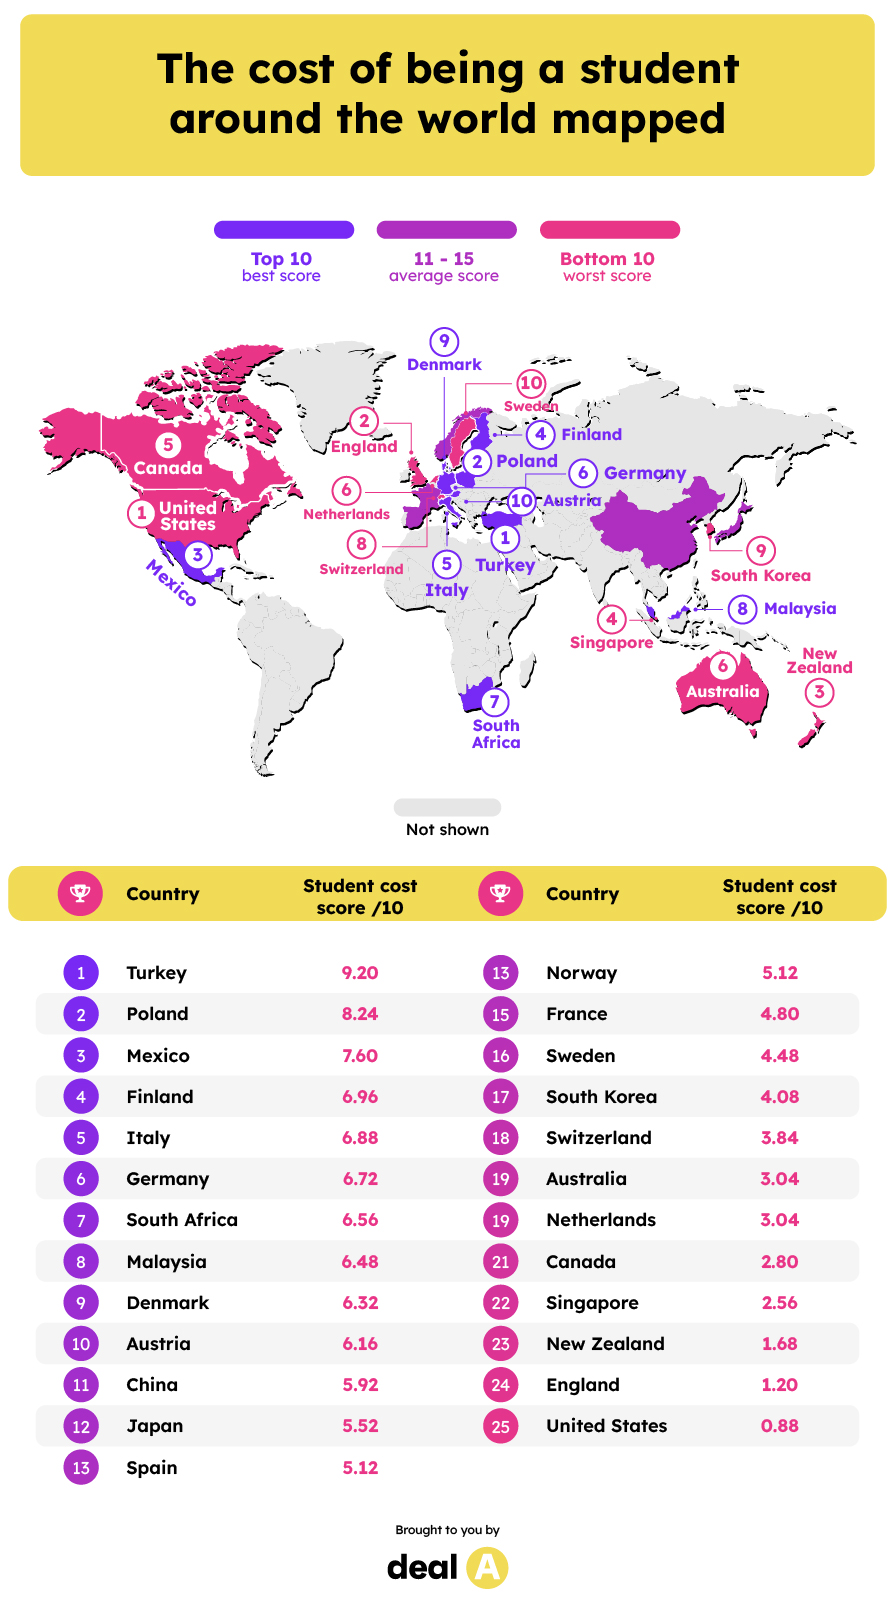 The cost of being a student around the world mapped